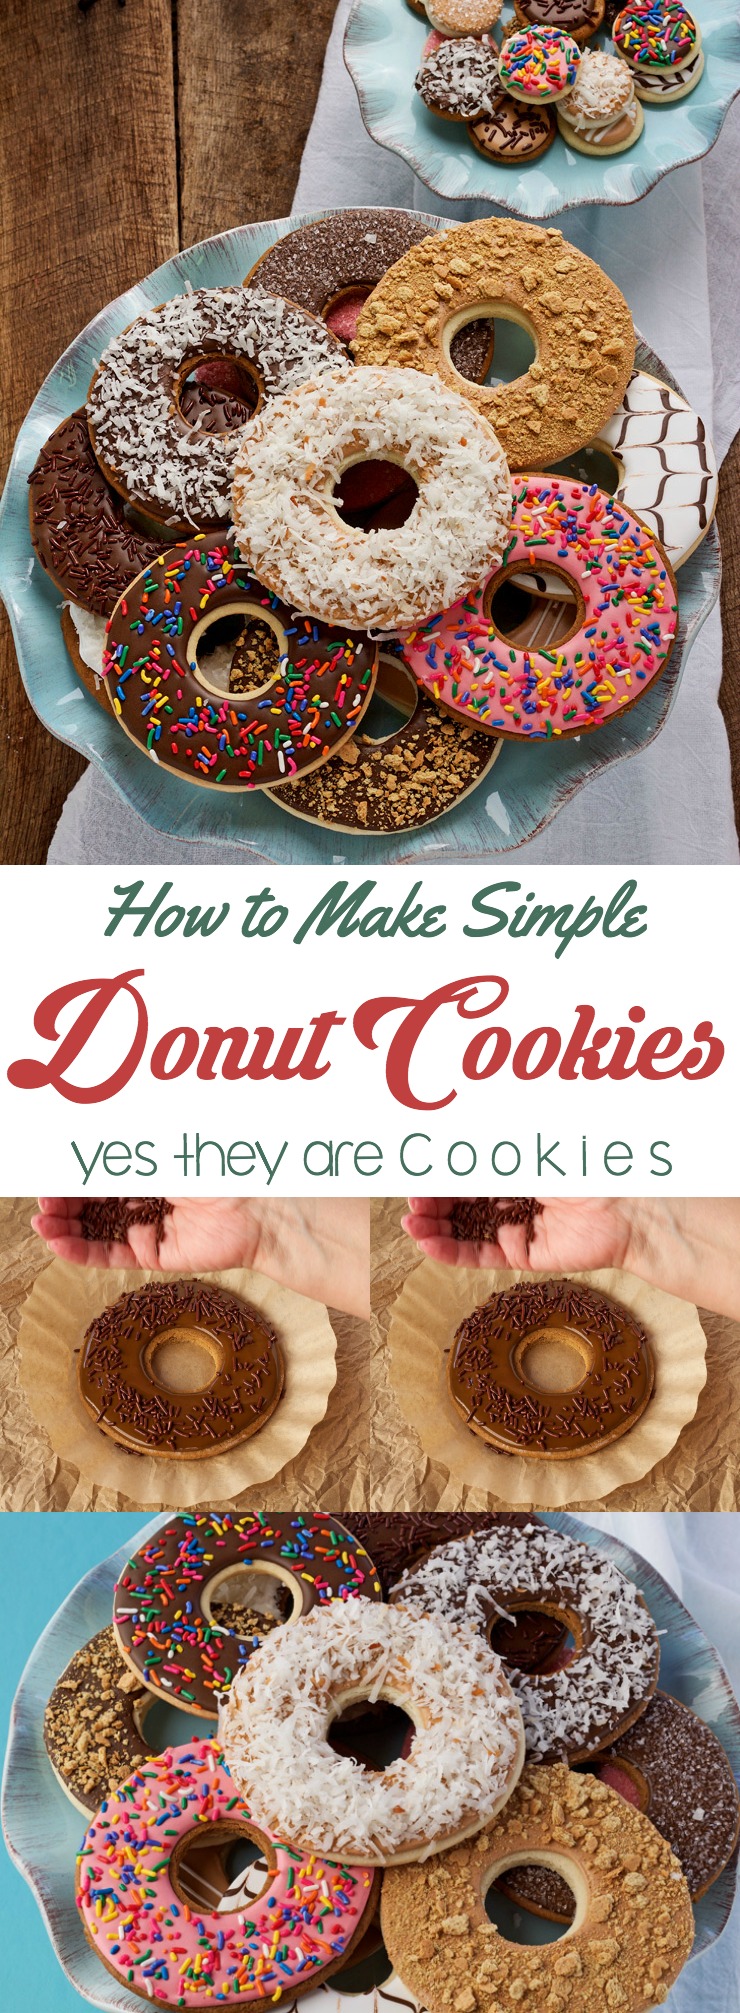 How to Make Simple Donut Cookies that Look Like they are Real Donuts | The Bearfoot Baker